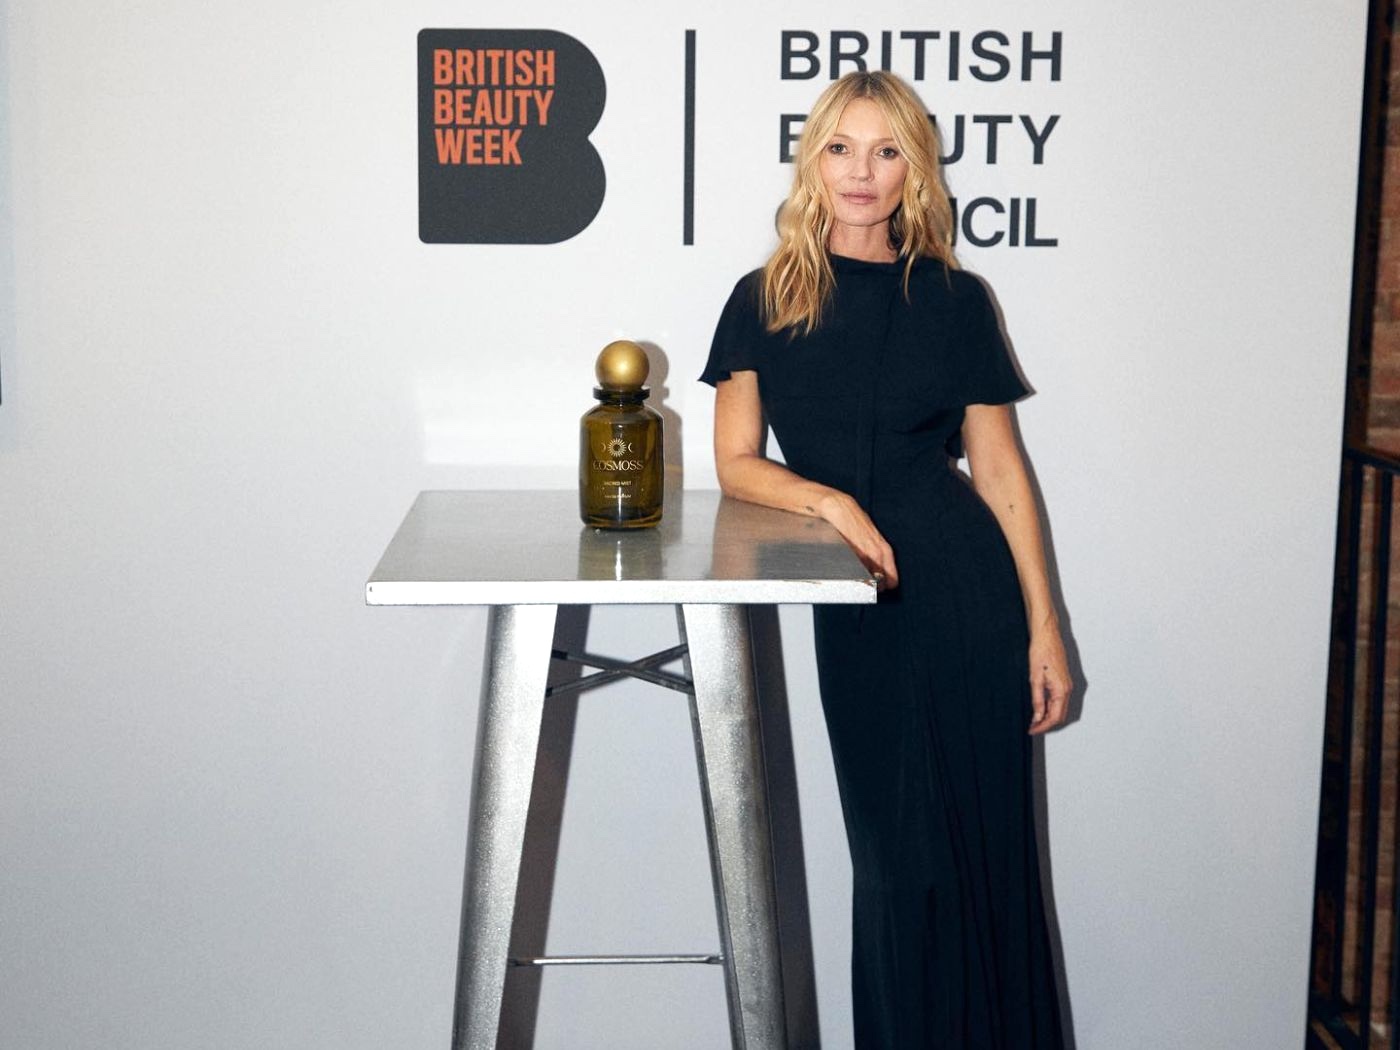 Kate Moss, with long blonde hair worn down and wearing a long black dress poses by a tall table with a bottle of beauty product. British Beauty Council logo on wall behind her.